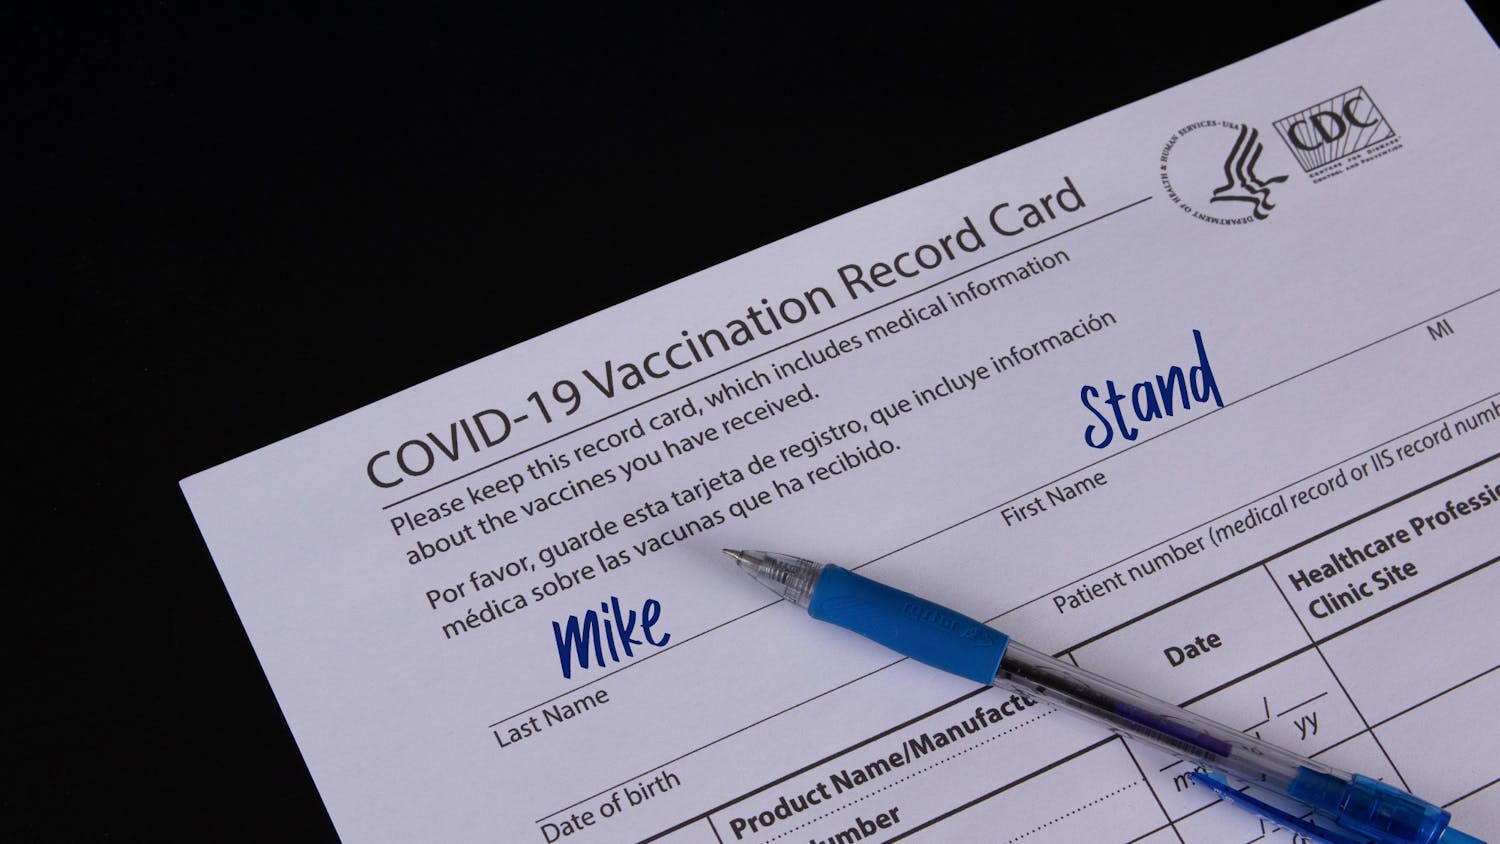 COVID-19 Vaccination record card and a blue pen on black backgro